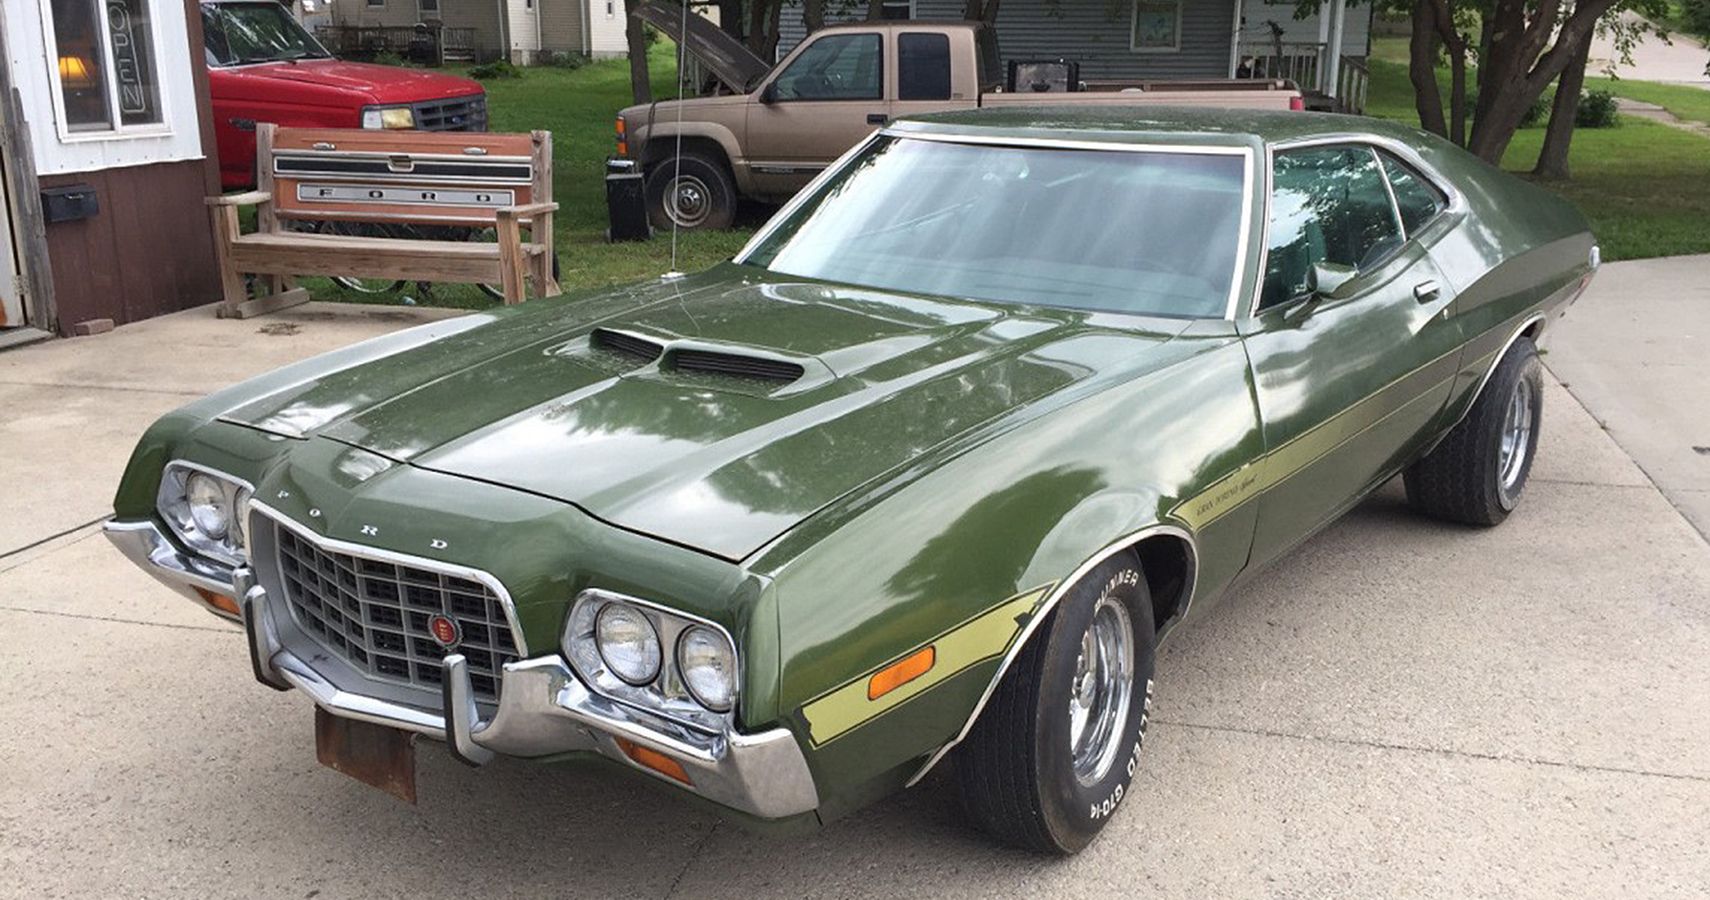 Here's What Happened To The Ford Gran Torino Movie Car Clint Eastwood Drove